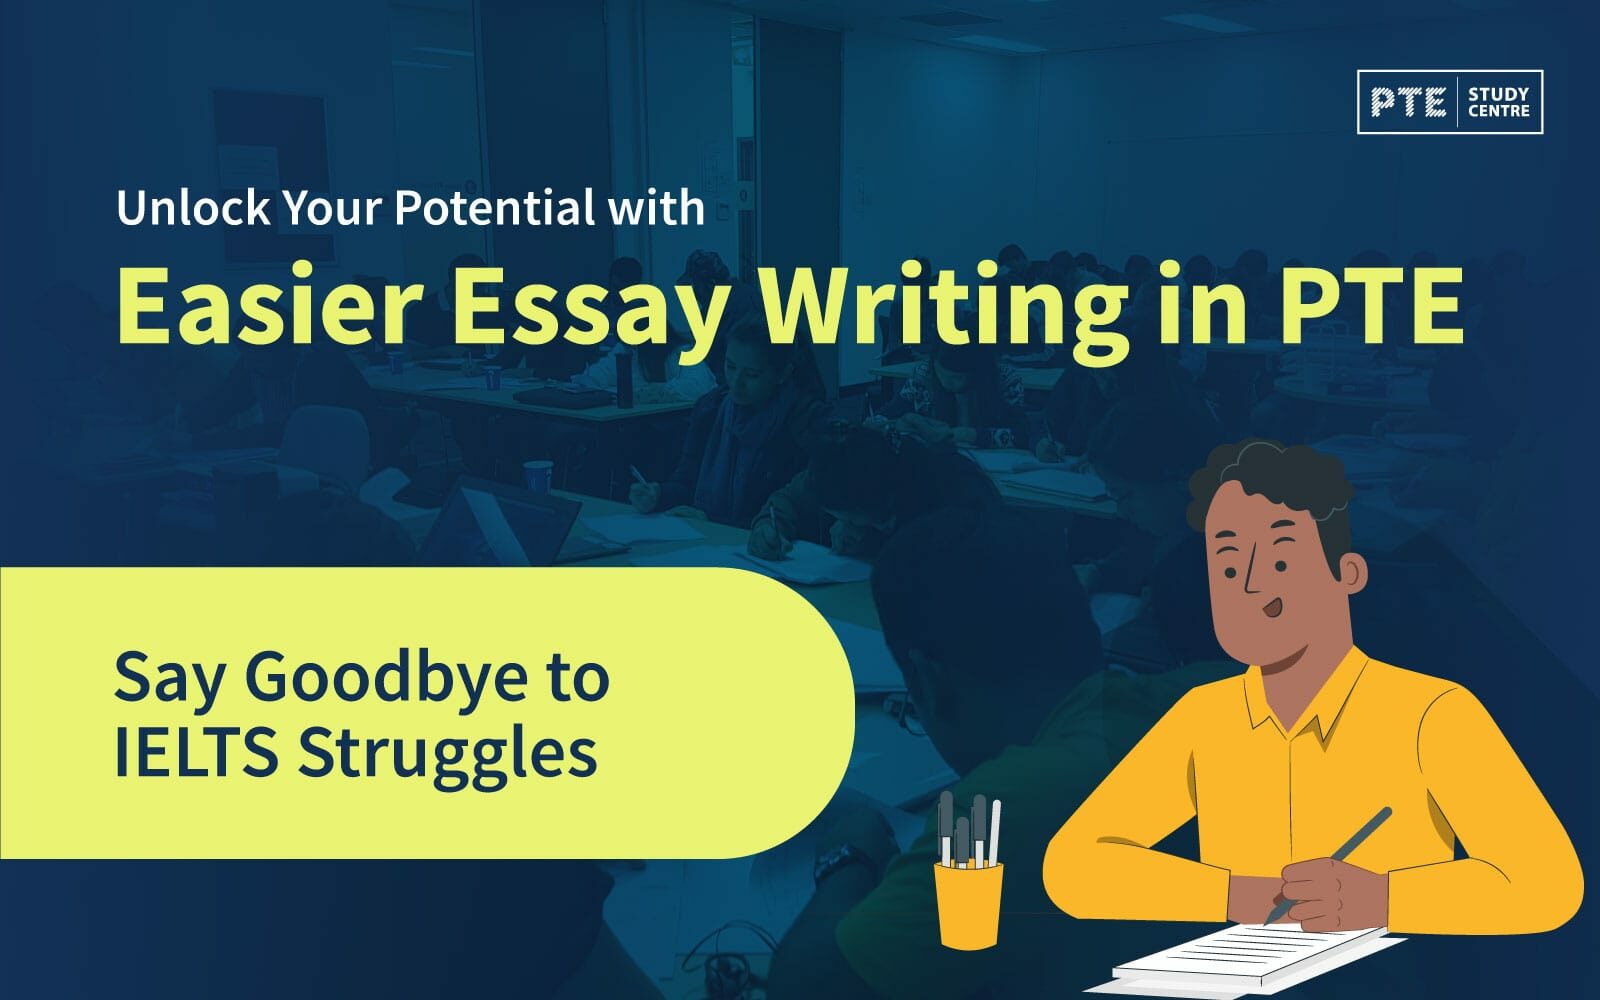 Unlock Your Potential with Easier Essay Writing in PTE: Say Goodbye to IELTS Struggles image